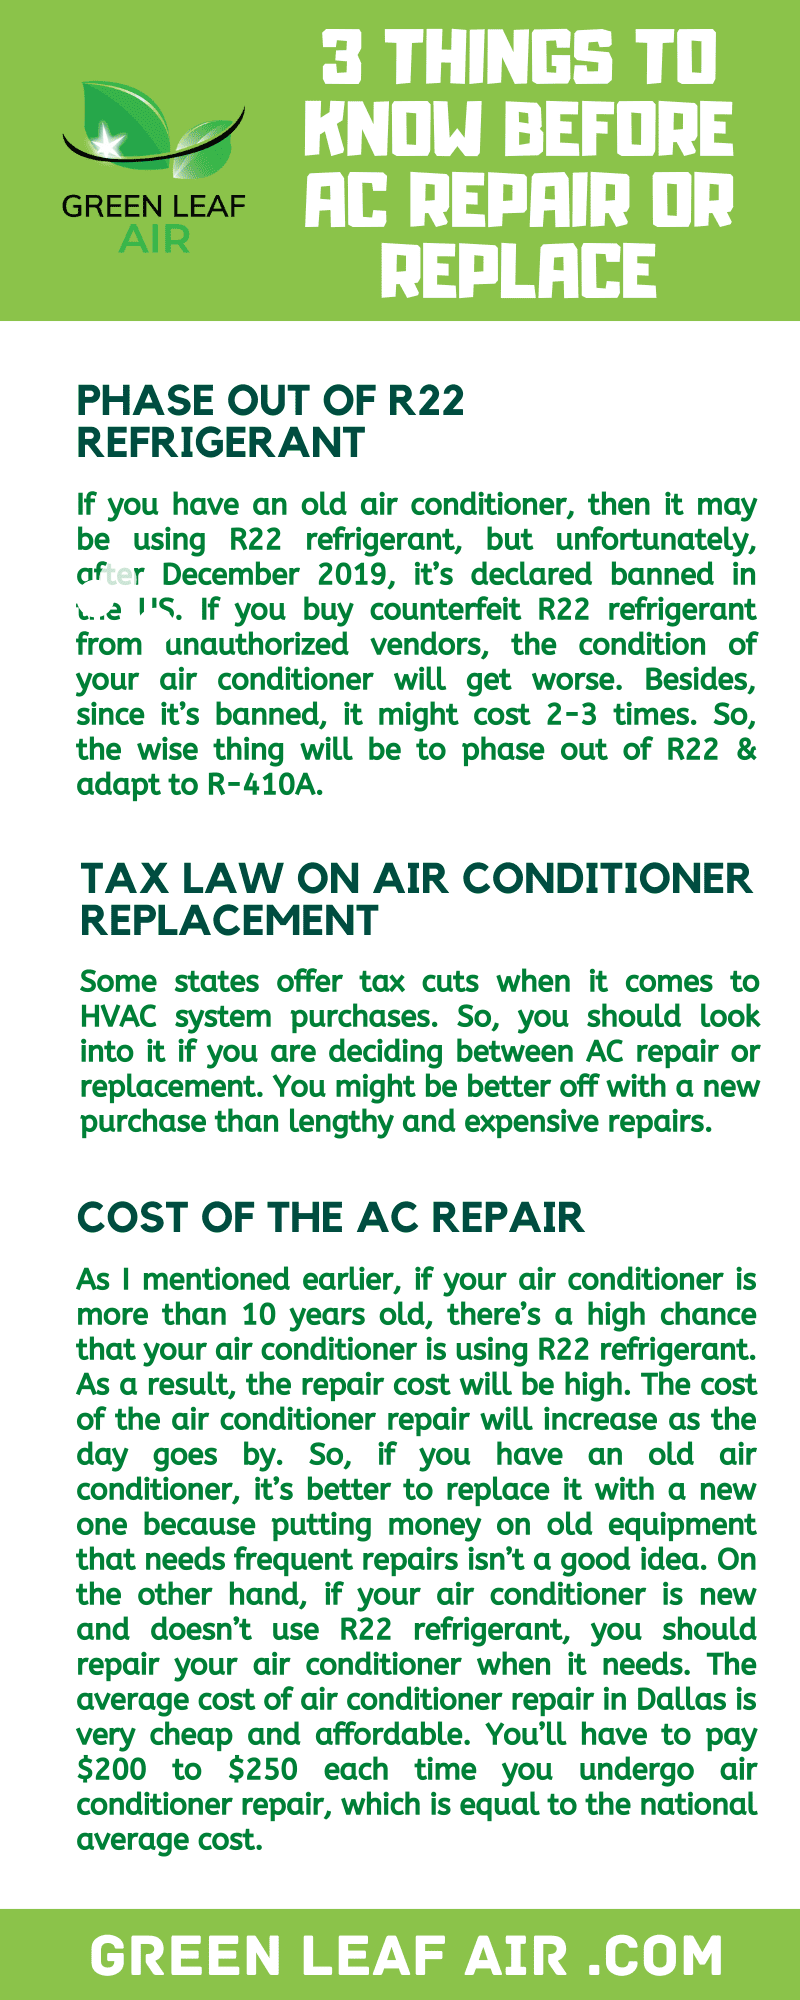 3 Things to Know Before AC Repair or Replace